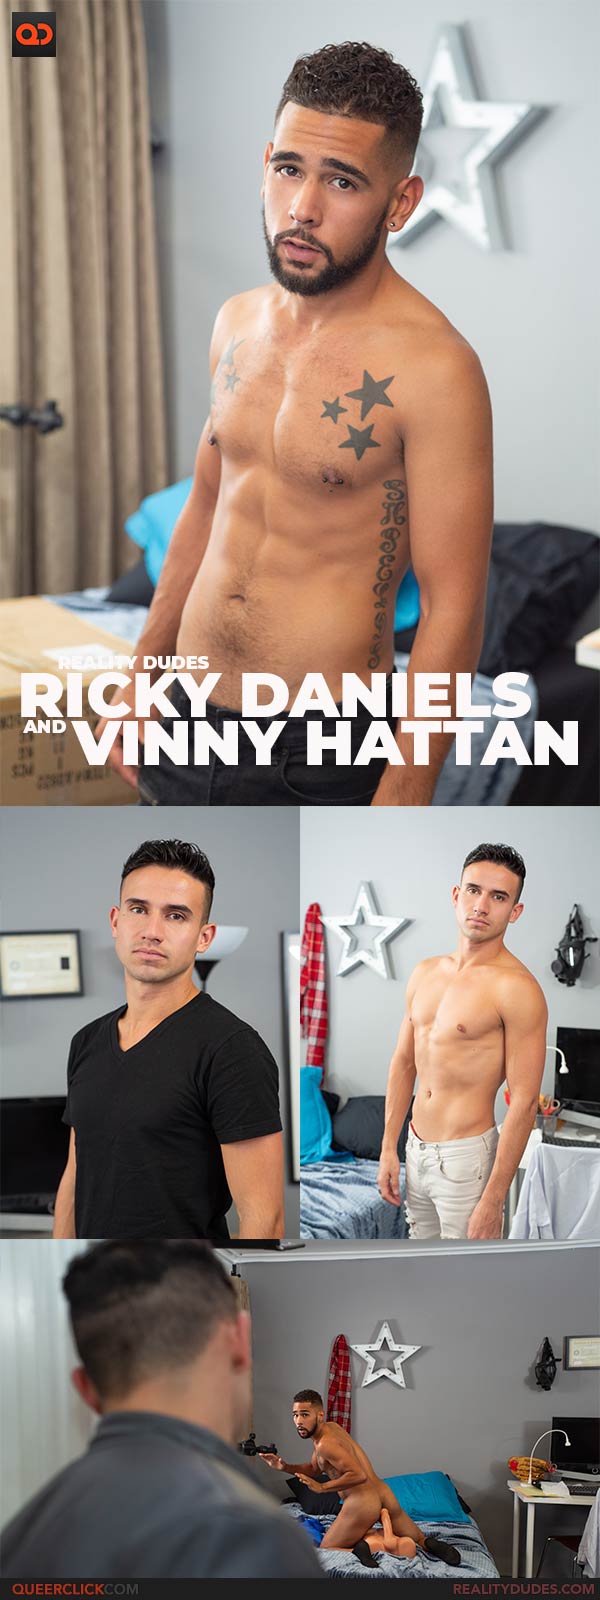 Reality Dudes: Vinny Hattan and Ricky Daniels